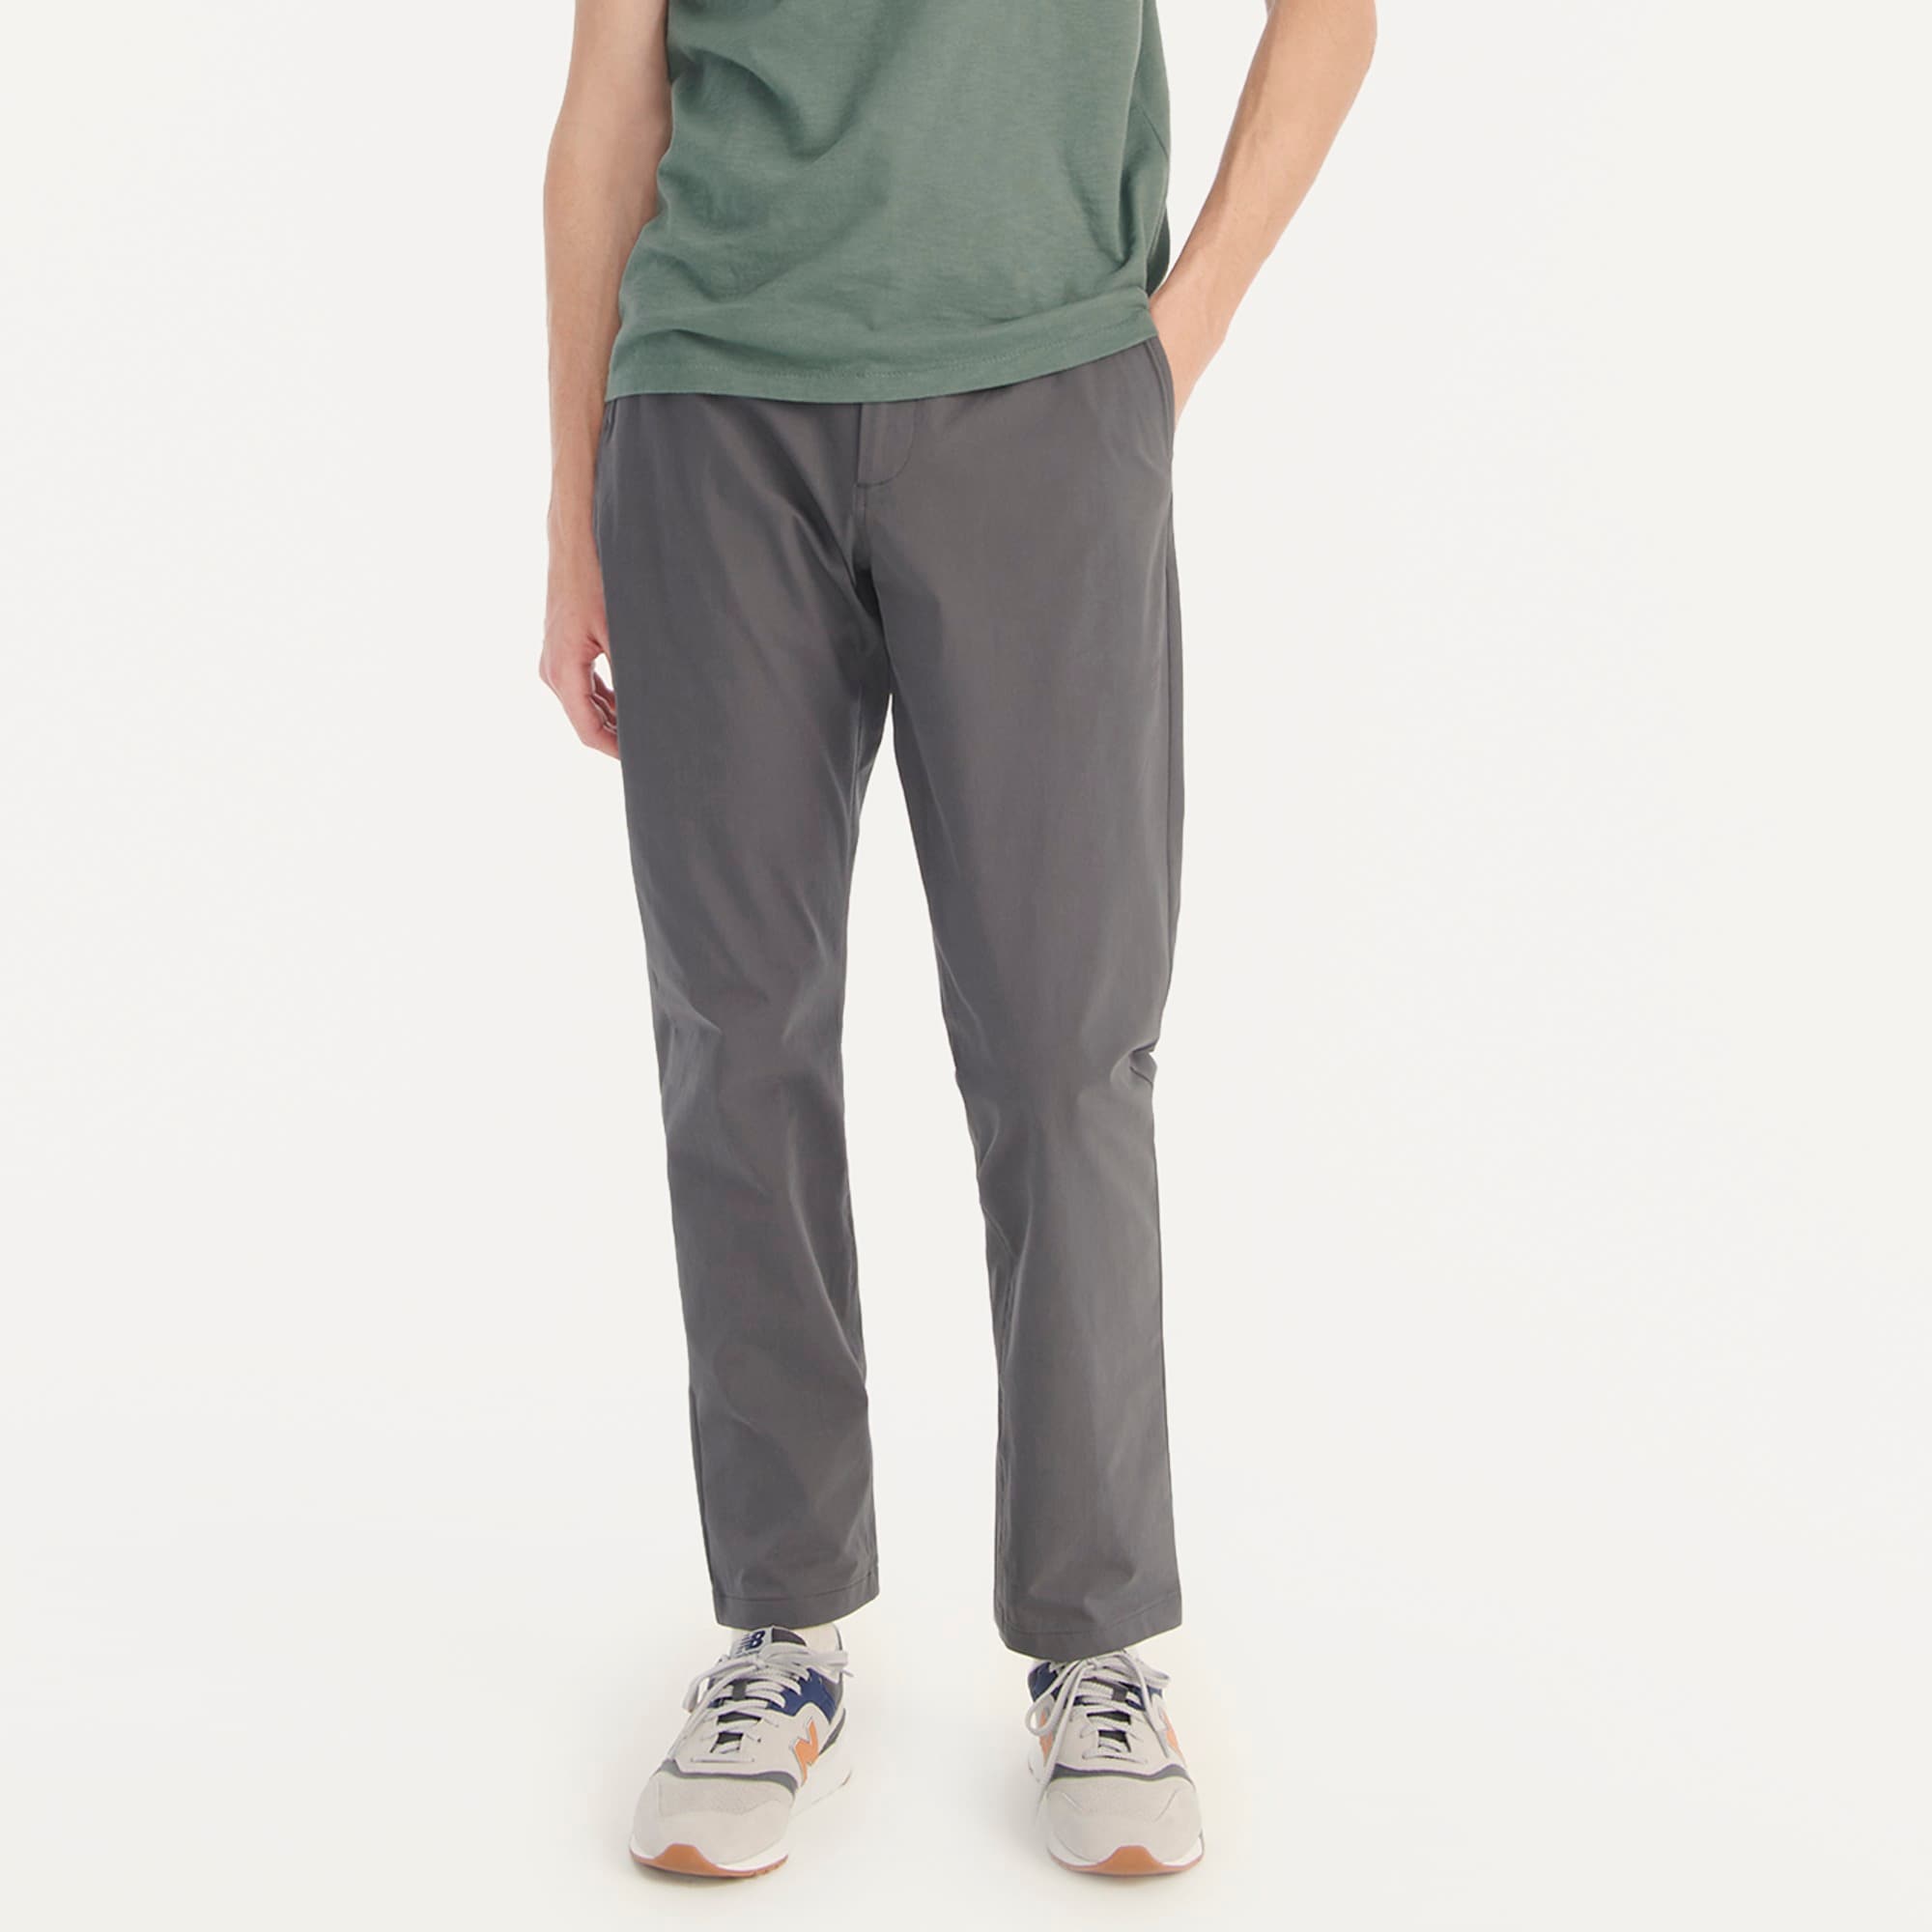 Jcrew 1040 Athletic tapered-fit tech pant